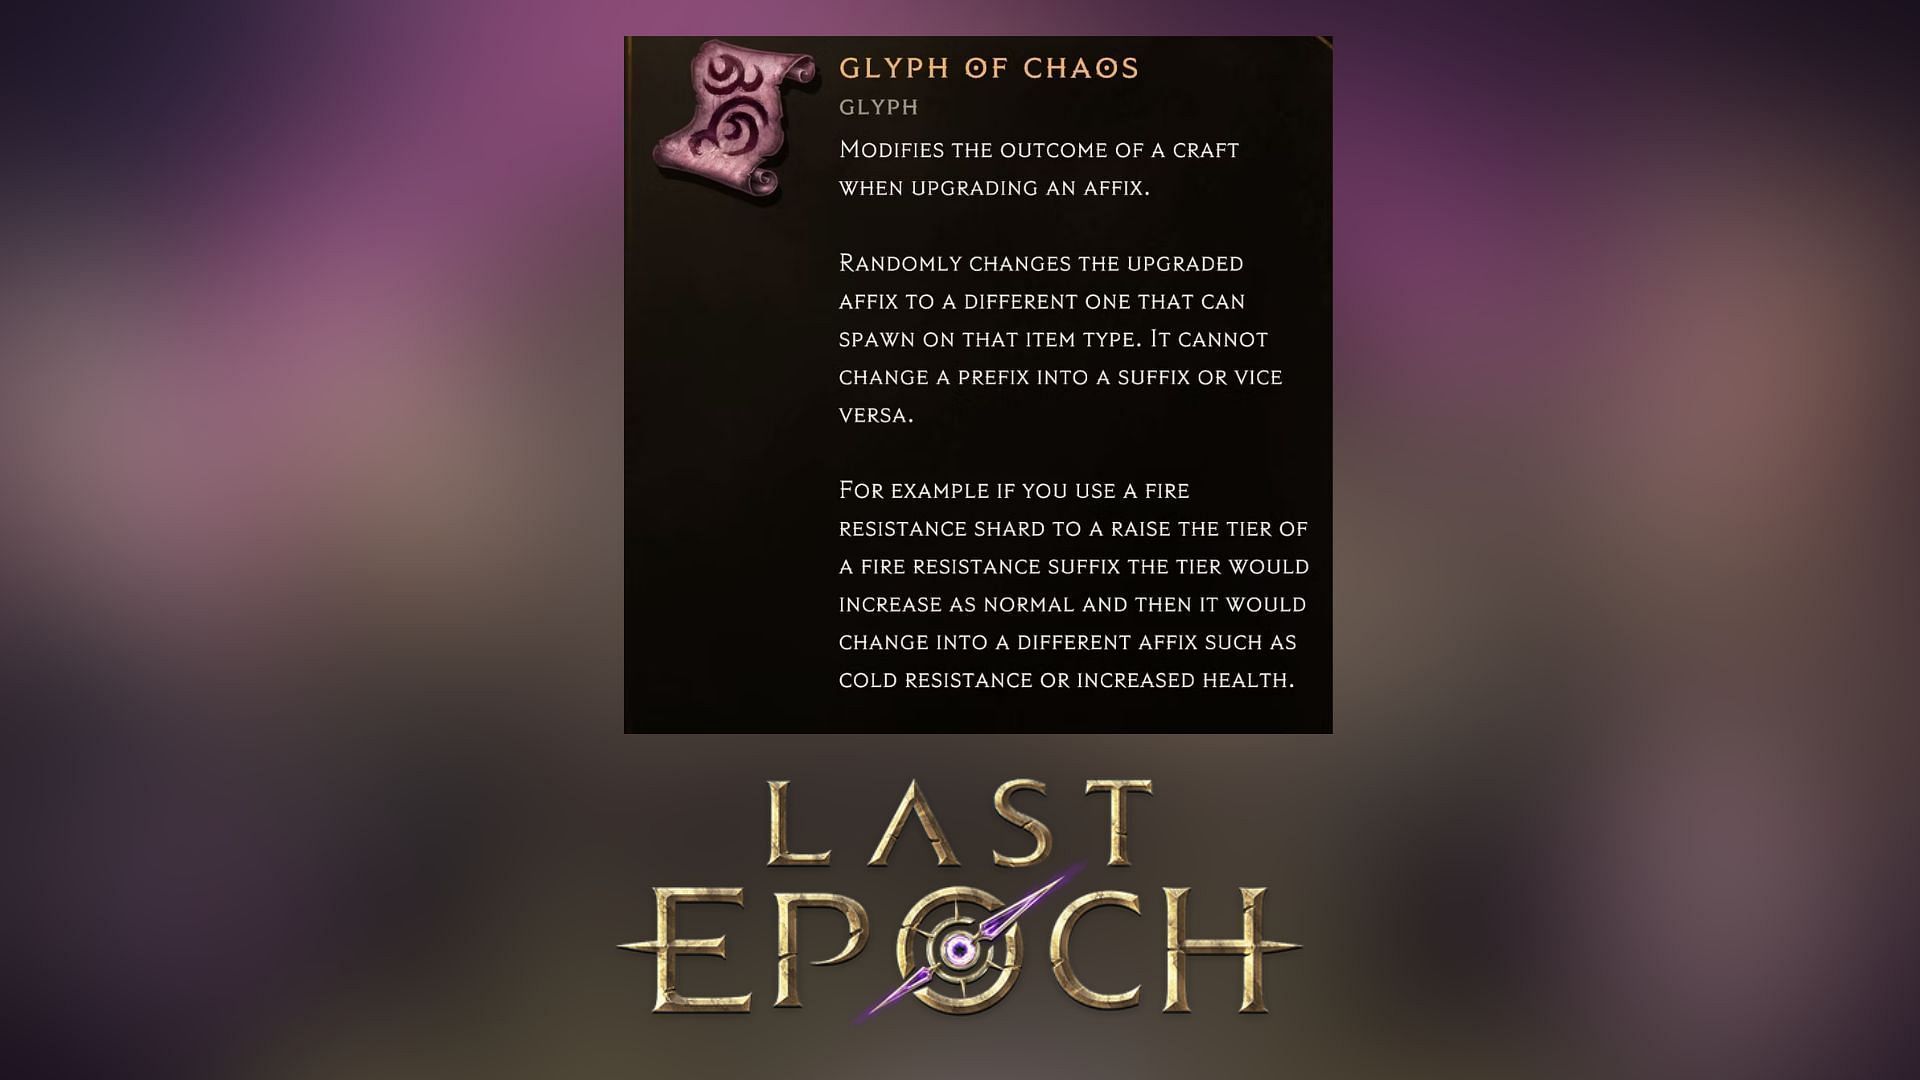 Glyph of Chaos Improves the outcomes of a craft when upgrading affixes (Image via Eleventh Hour Games)